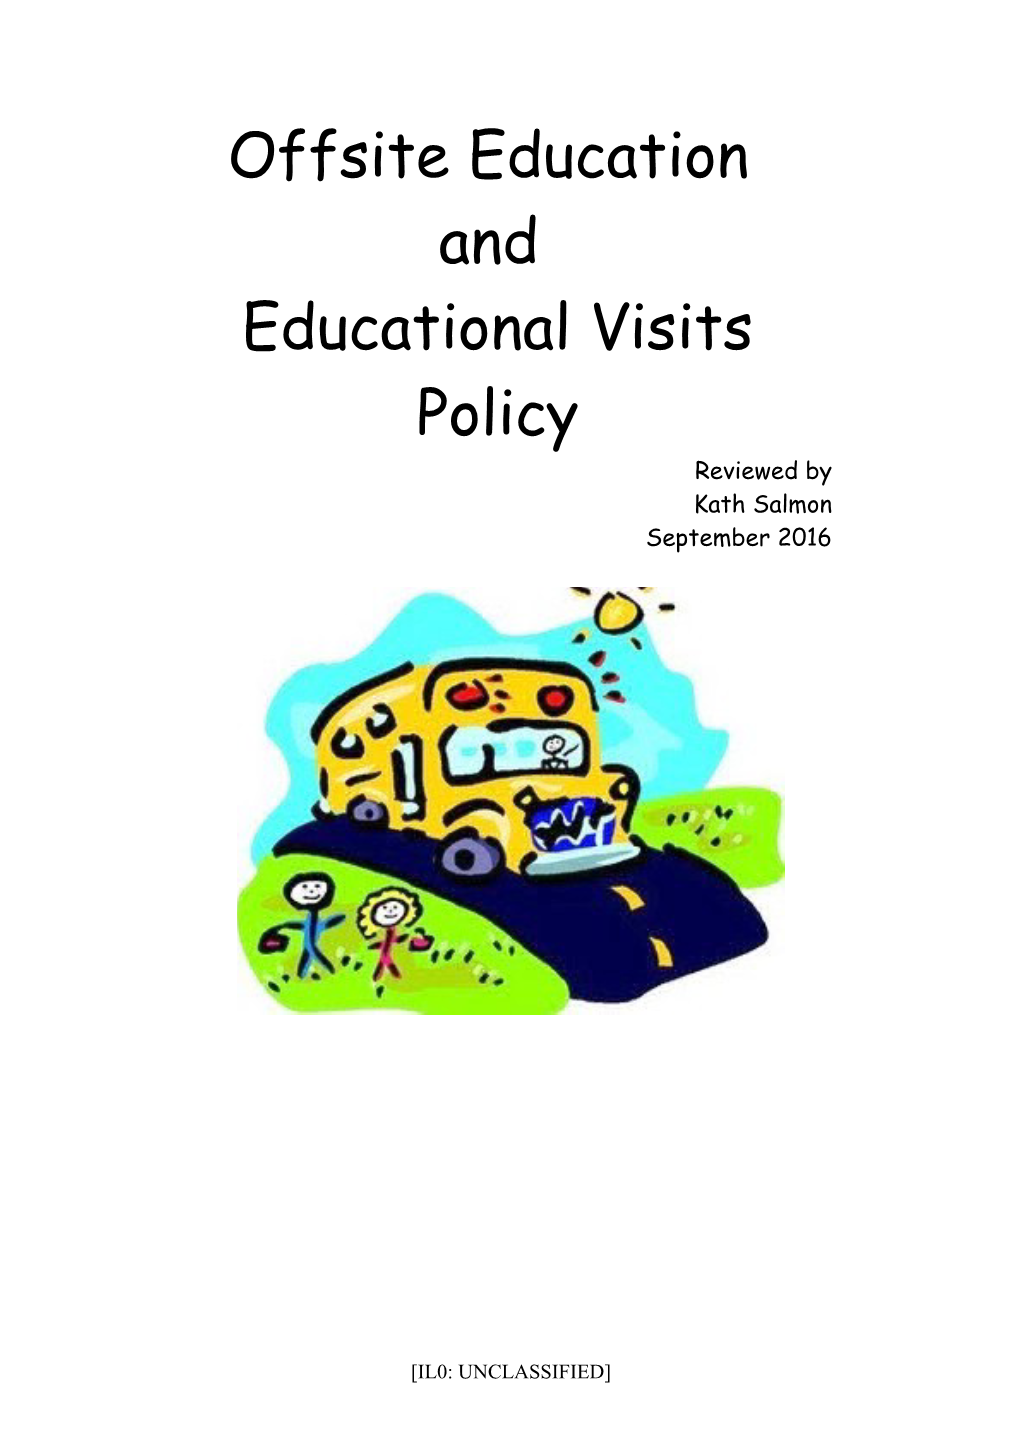 Model School Policy on Educational Visits